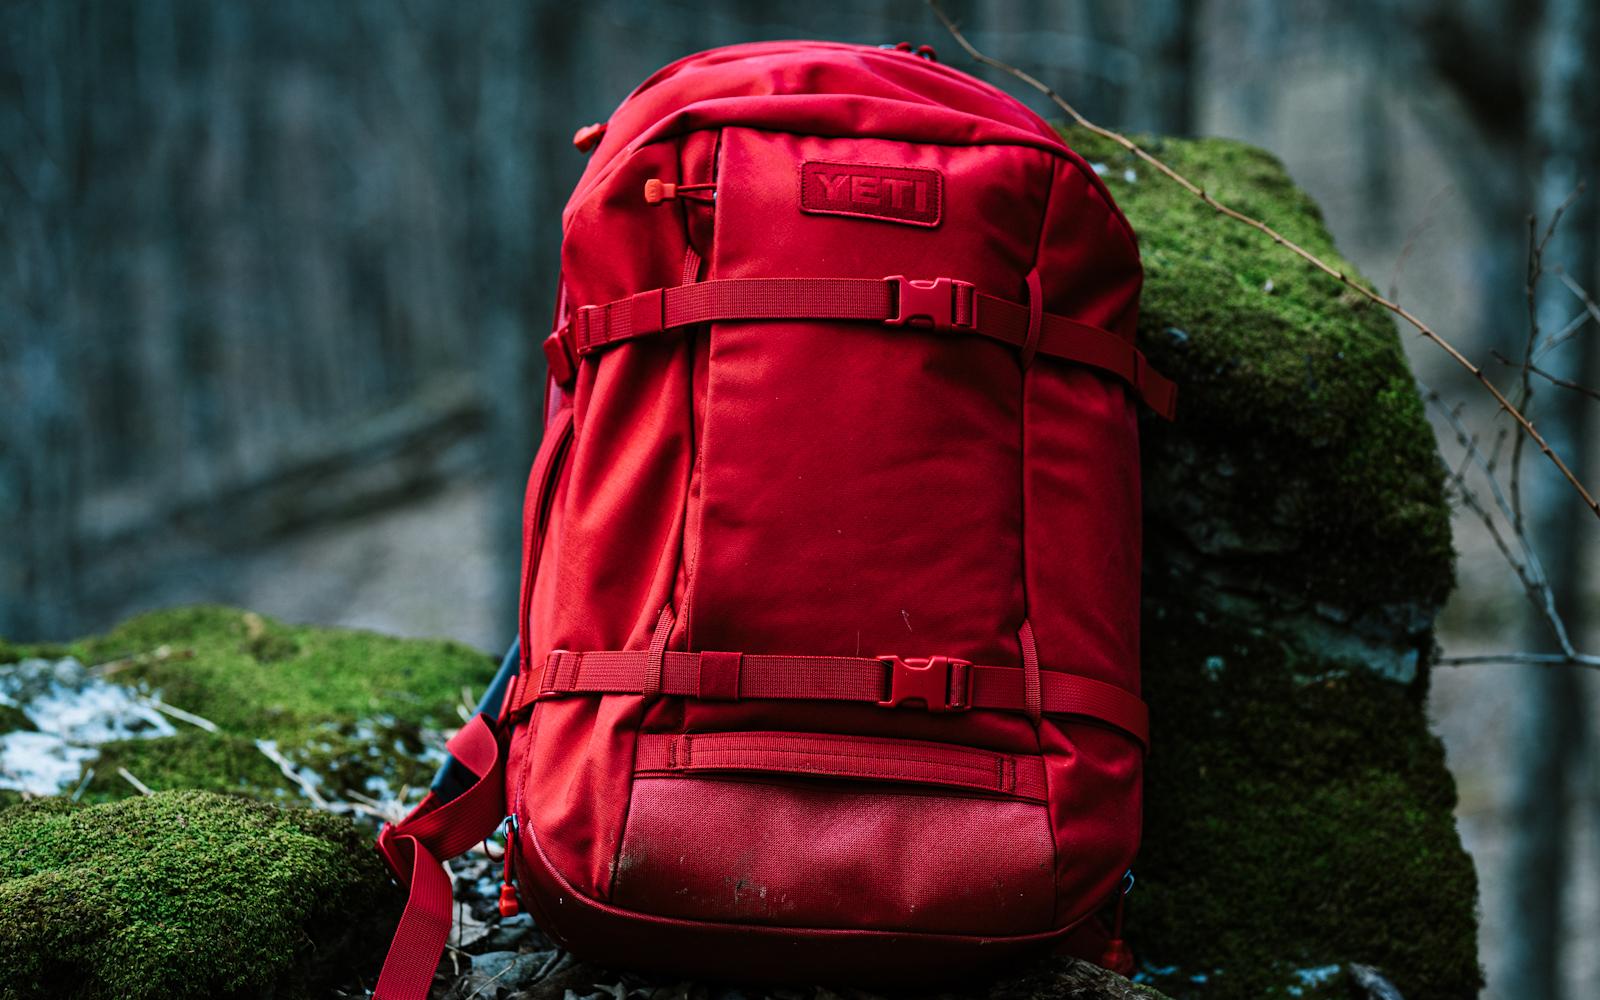 Yeti Crossroads Review - Rokslide Luggage and Backpack Review